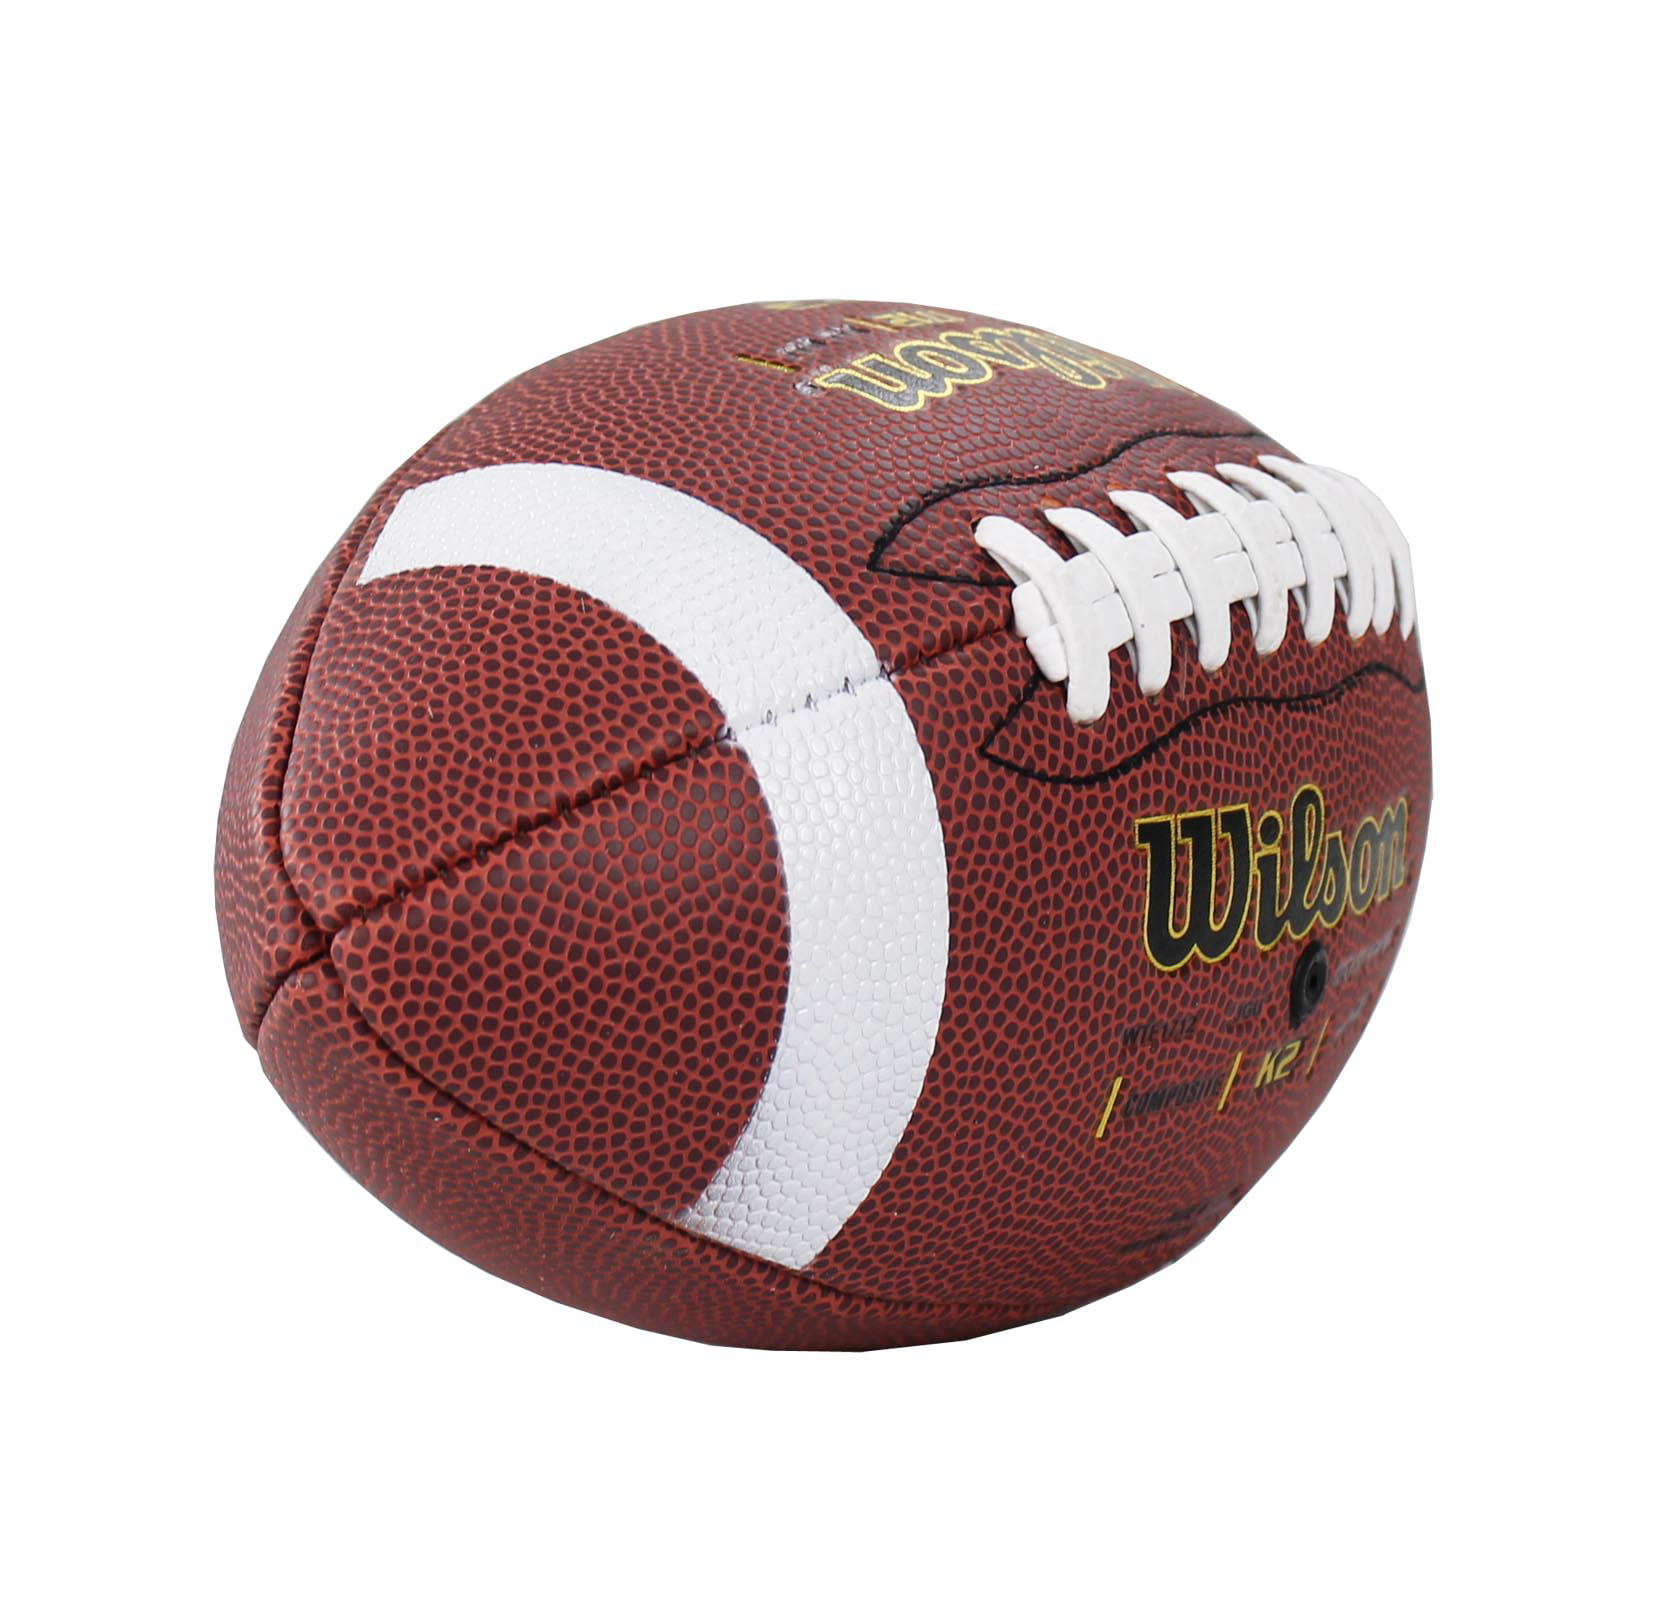 Midwest Pro Touch Composite Leather American Football Ball Tan Official Size 